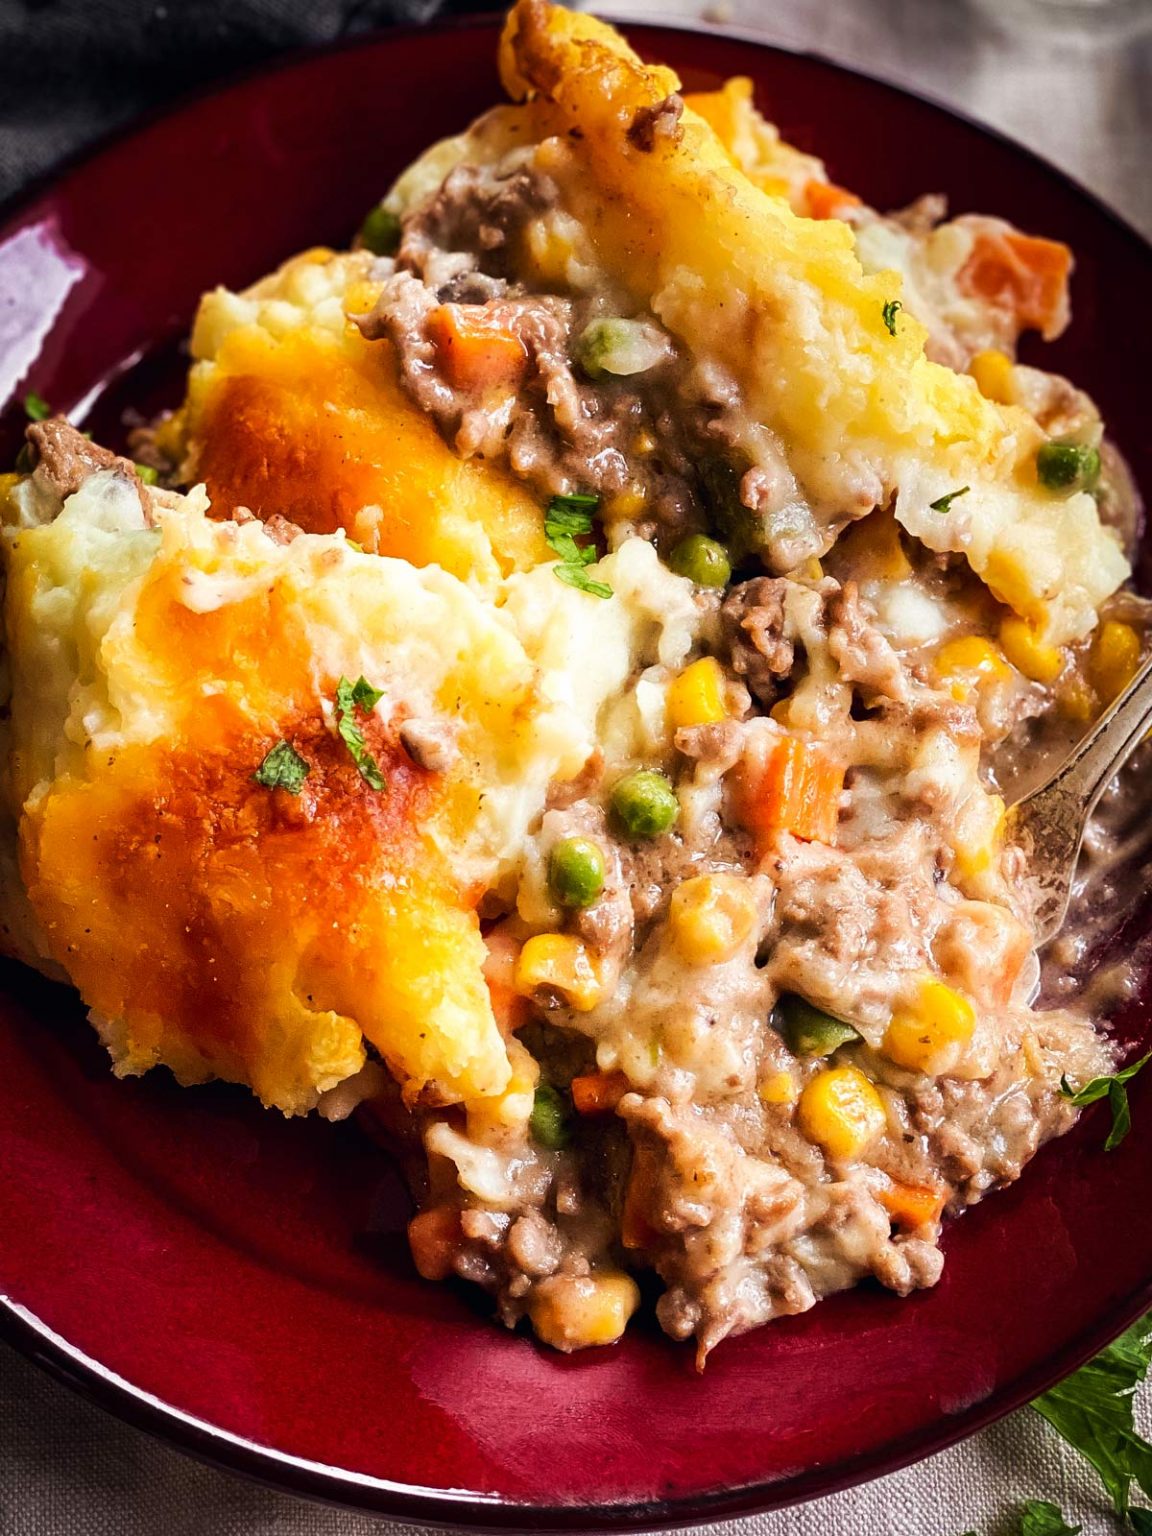 Easy Shepherd's Pie with Instant Mashed Potatoes Recipe - Unfussy Kitchen